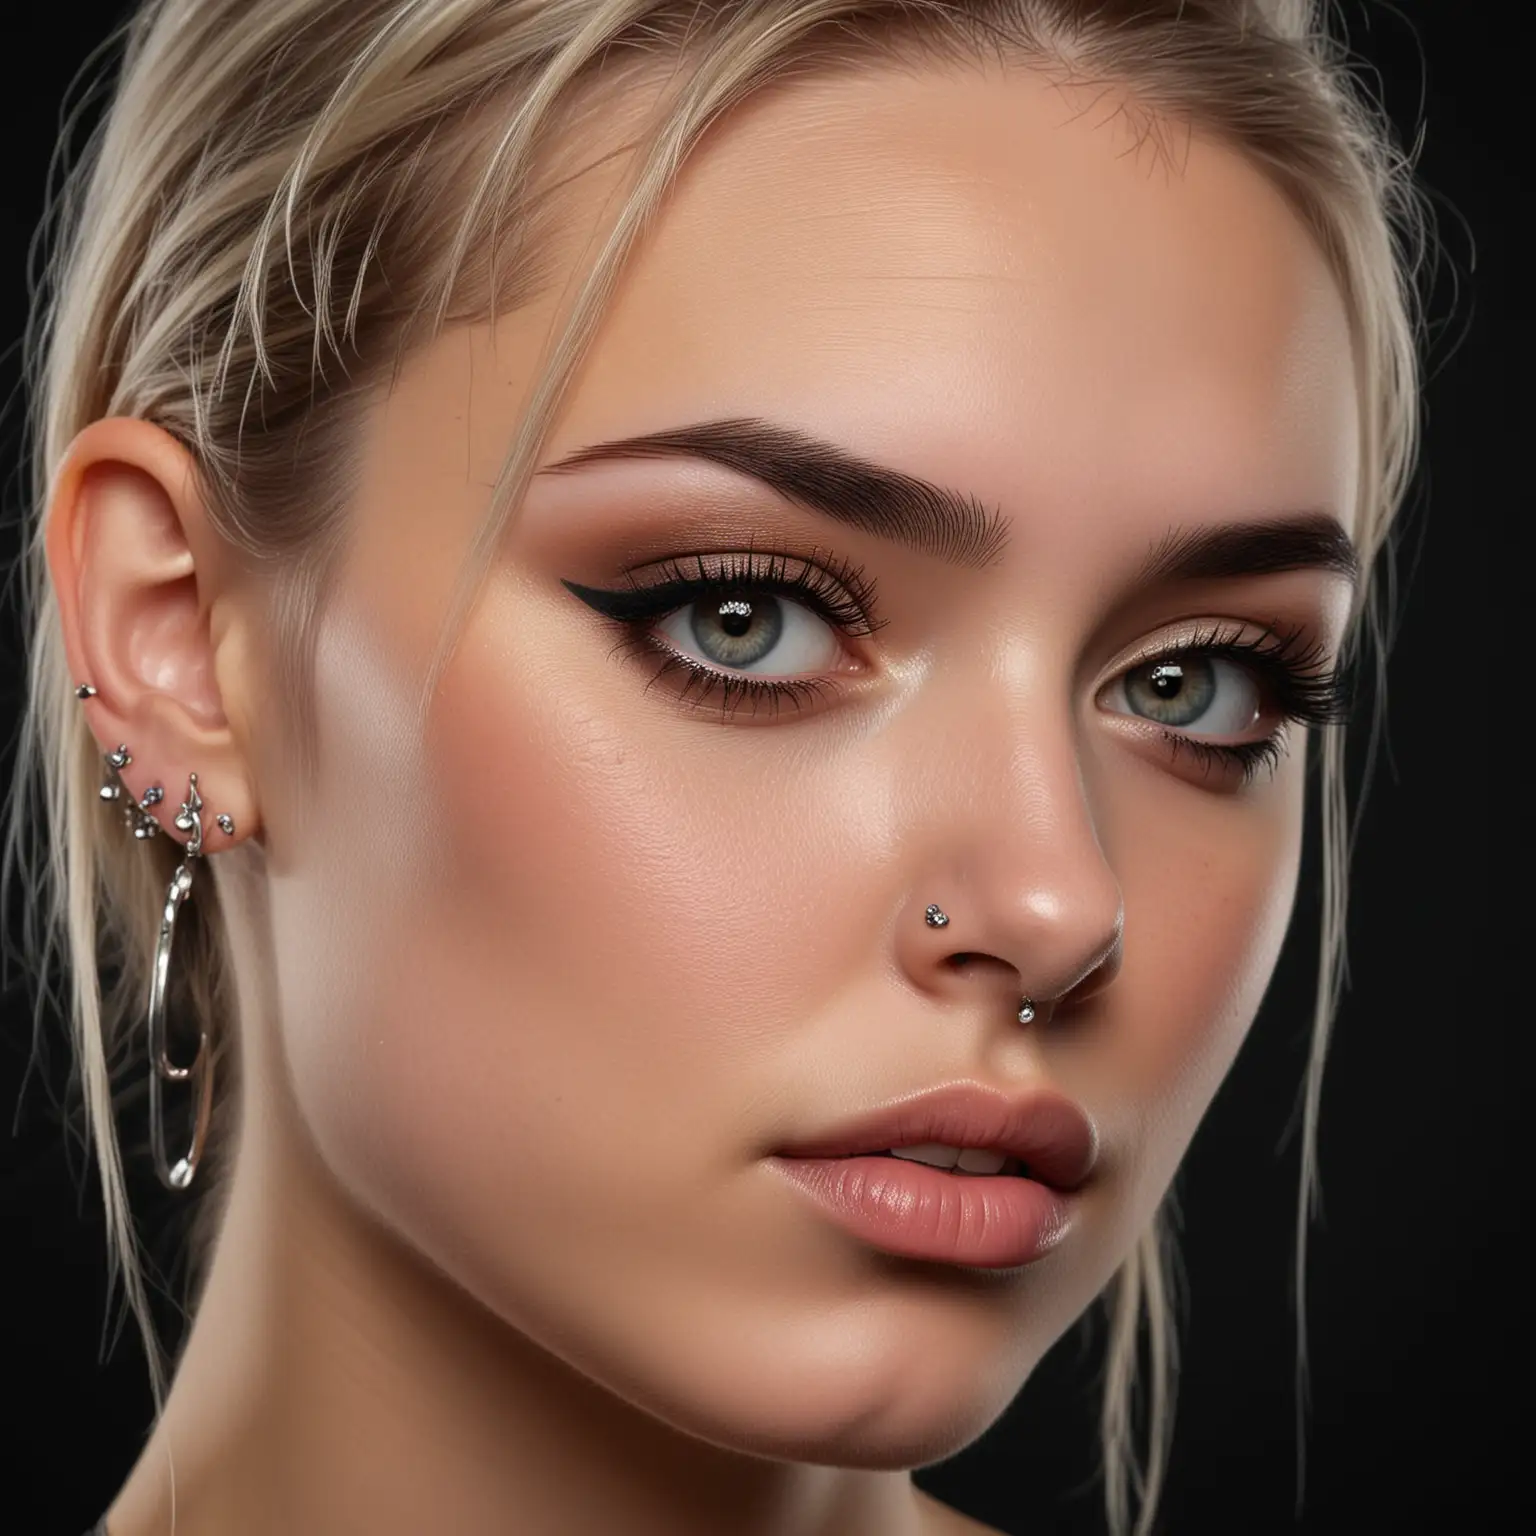 piercing 
a close up portrait of beautiful girl with piercings on ear and eyebrow to show the piercings . the photo focus is on piercings
black background
Render this scene as a highly stylized, almost painterly digital illustration with careful attention to lighting, textures and muted colors. The lack of literal representation allows the deeper emotional resonance to take precedence.